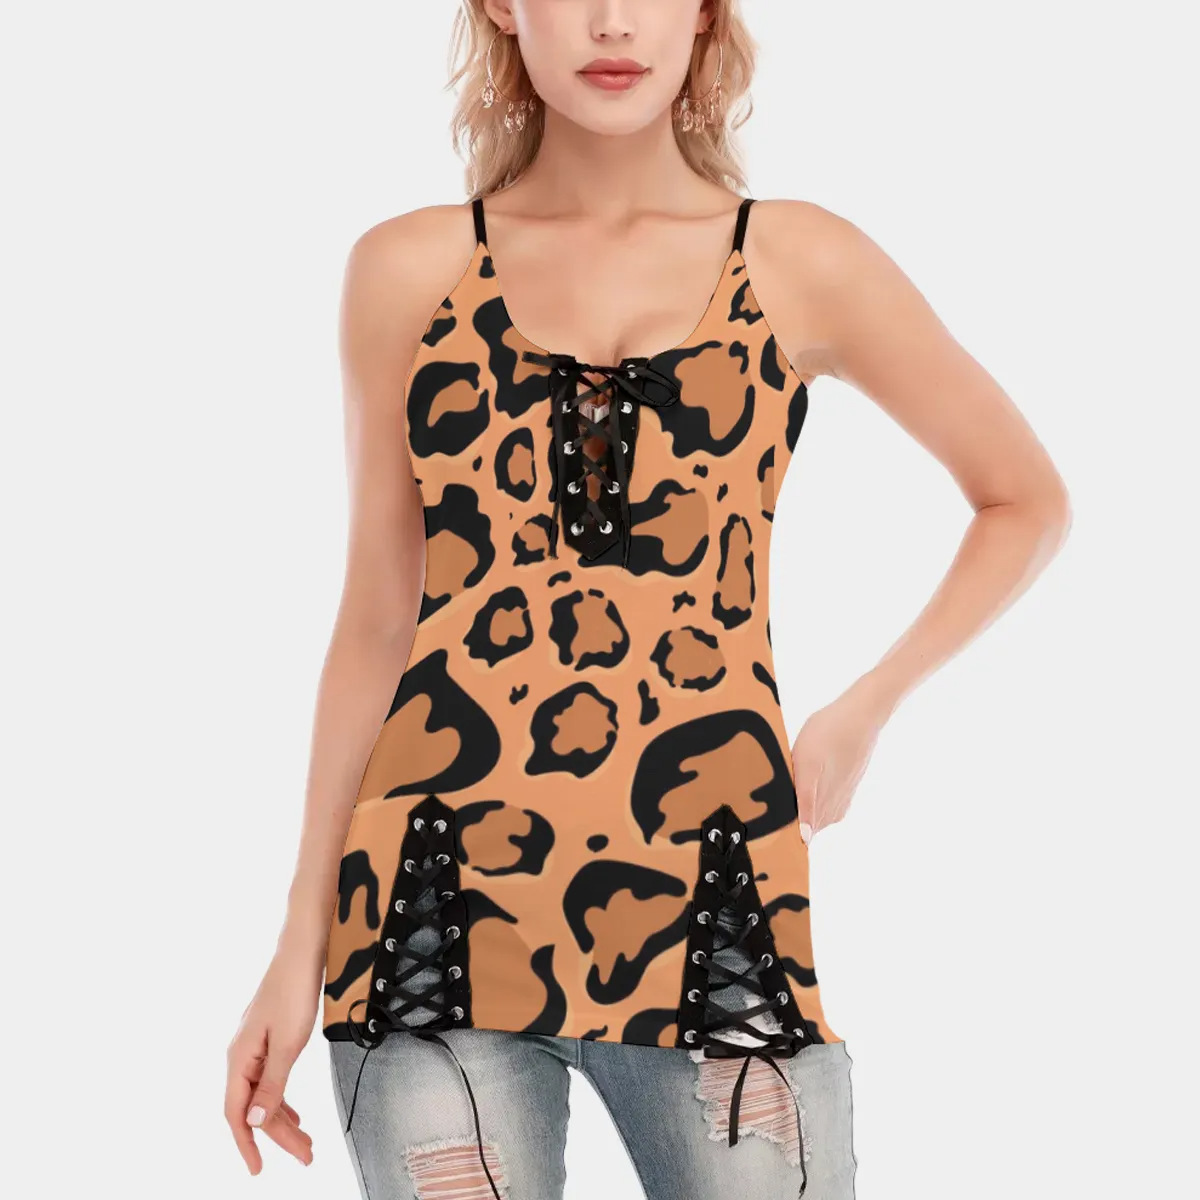 custom all over print women's eyelet lace up cami dress